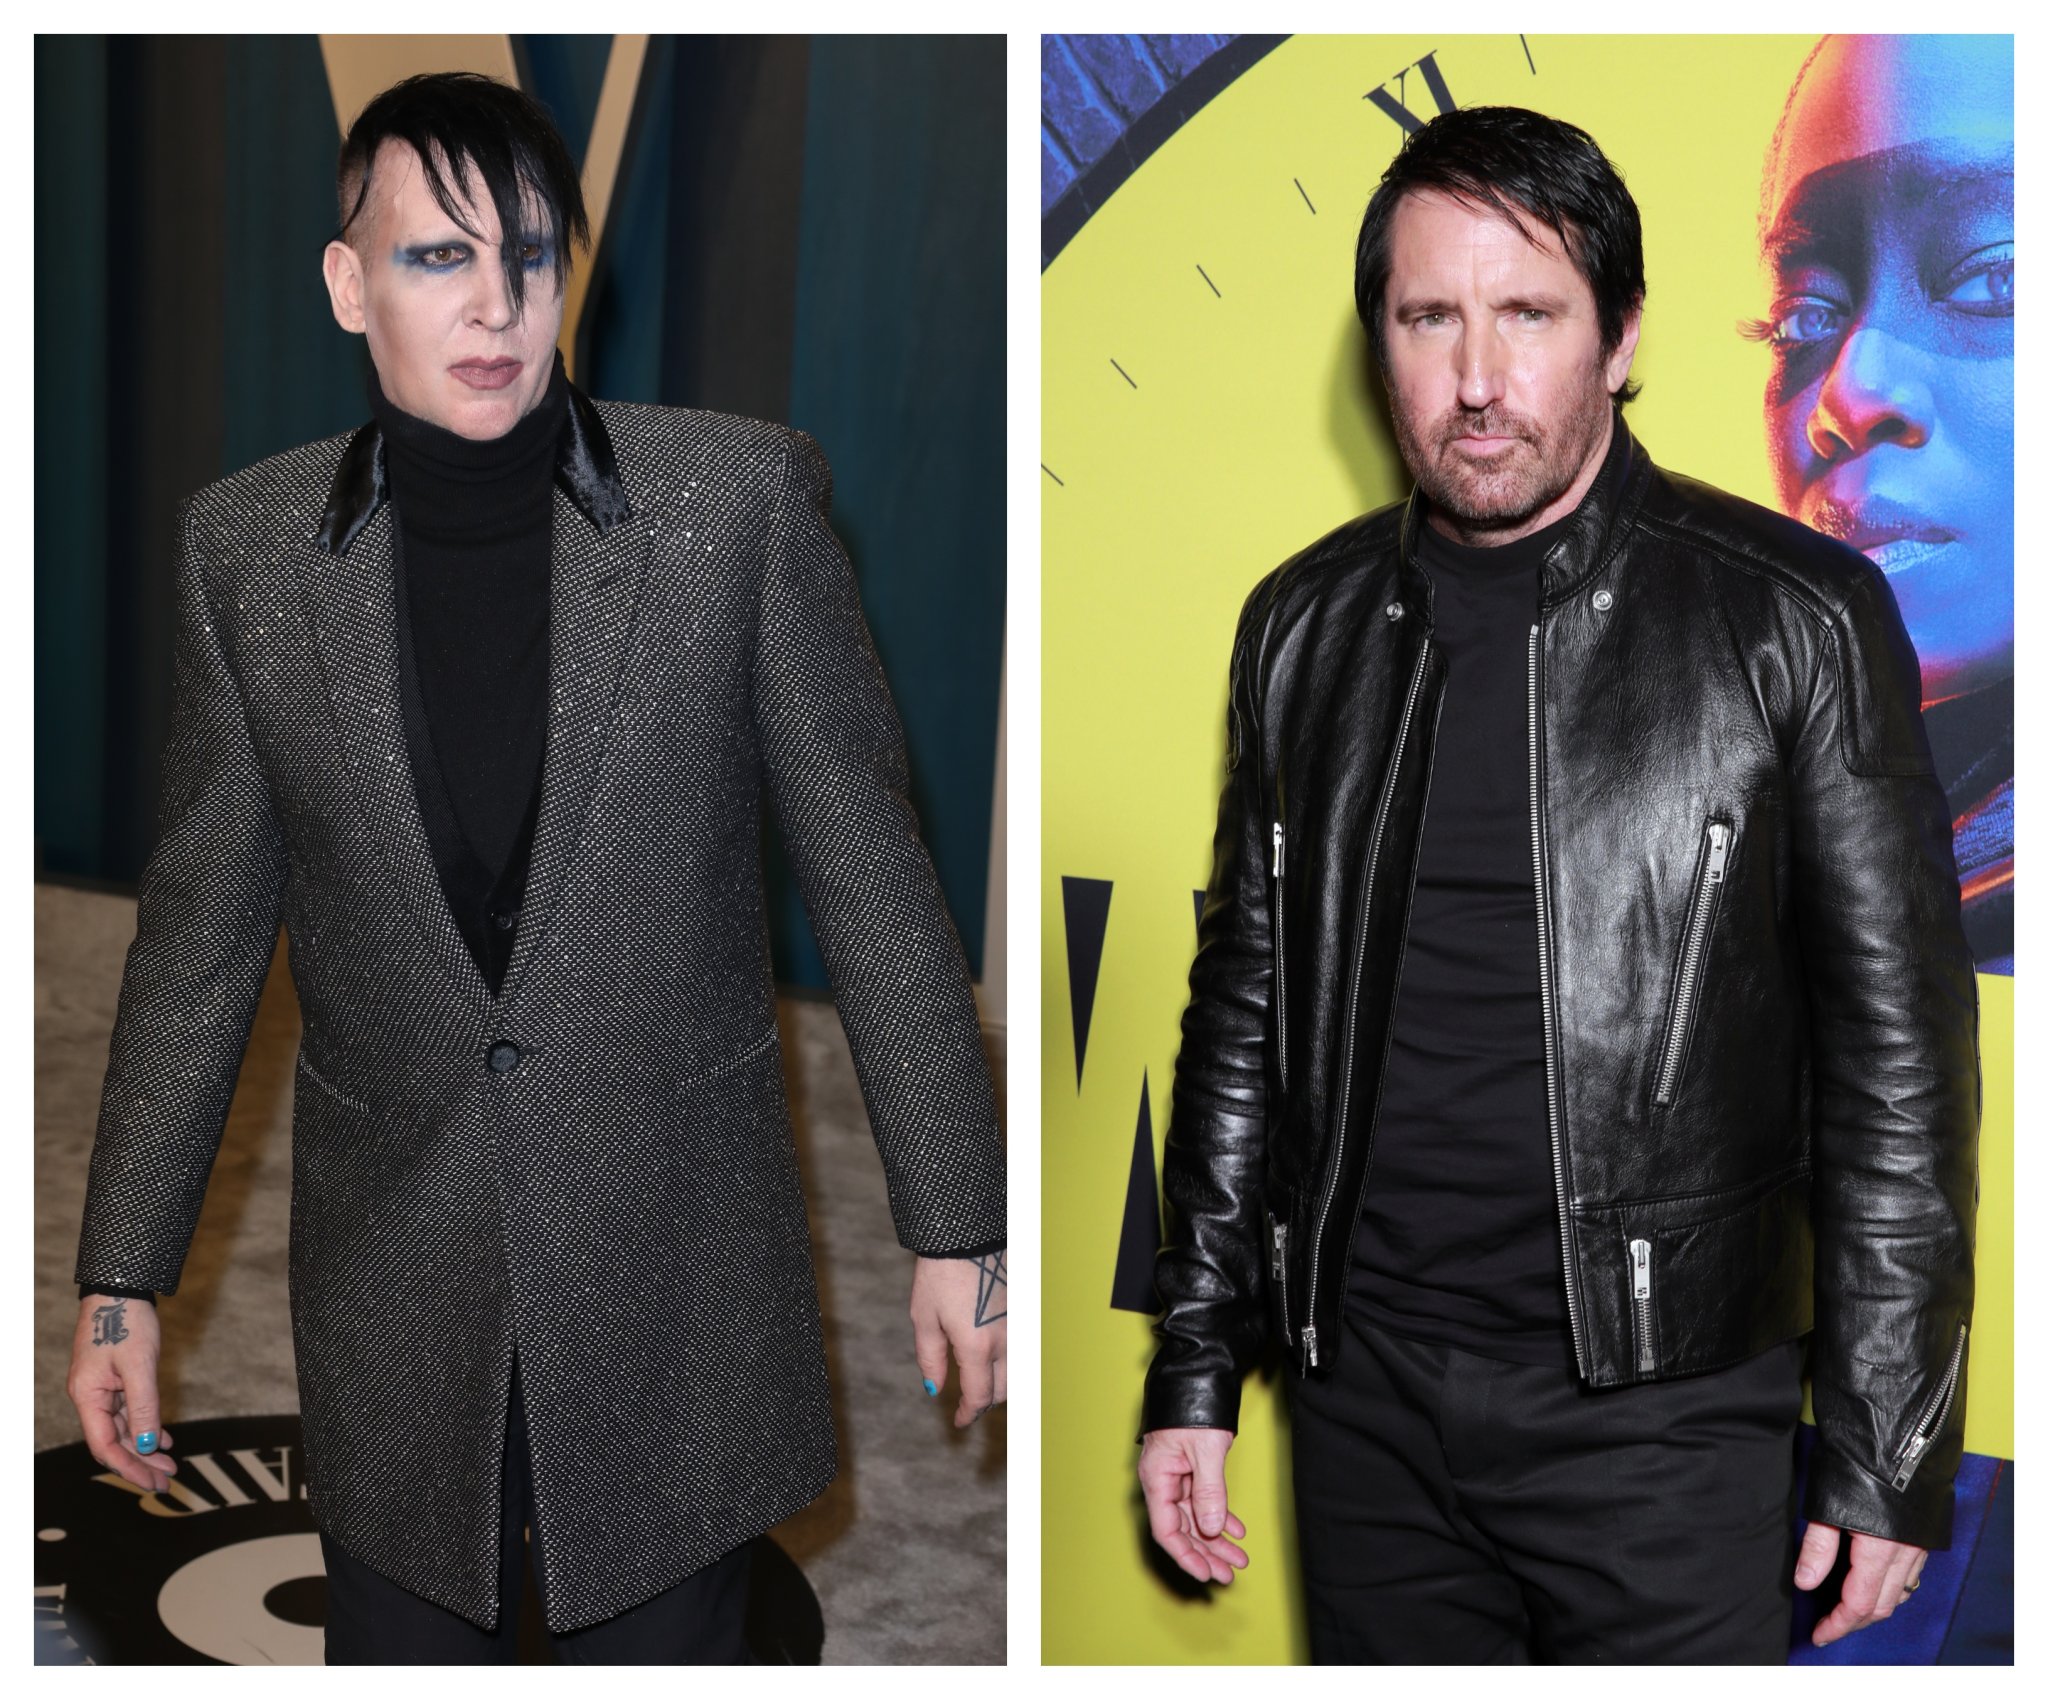 Trent Reznor Slams Marilyn Manson, Refutes Claim About Action Together